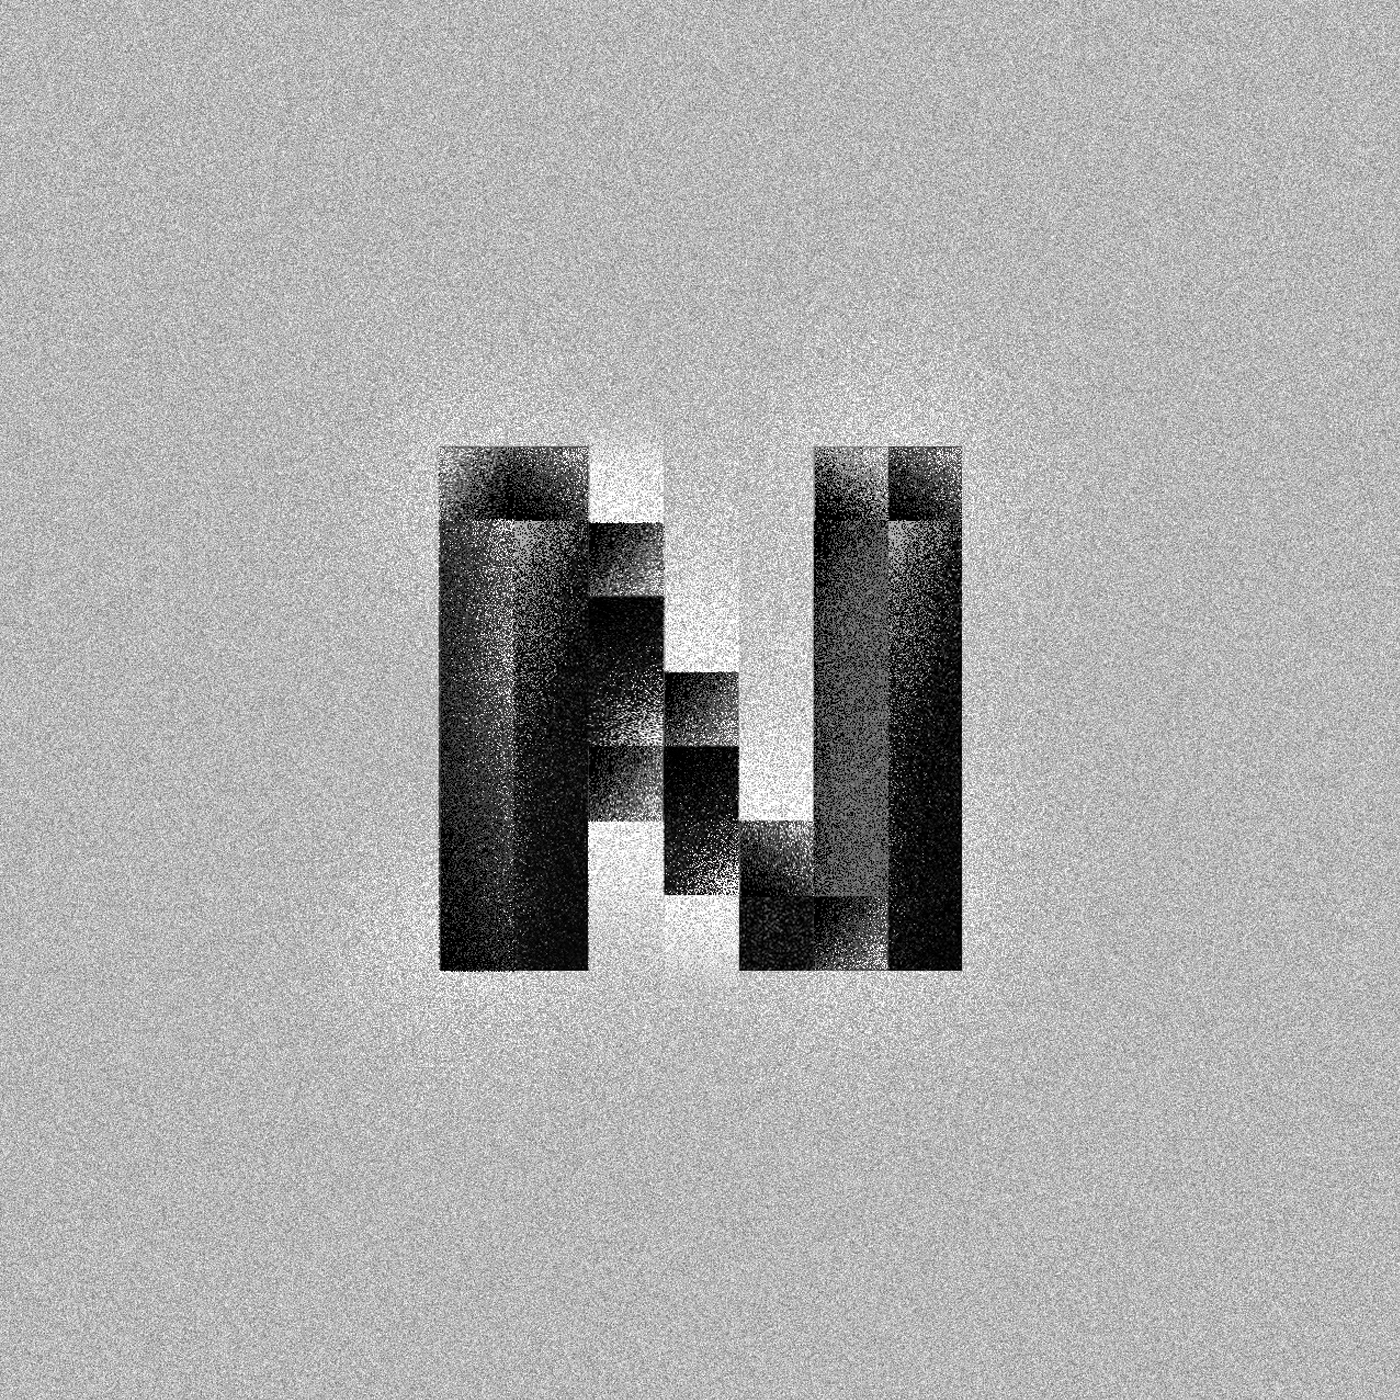 36daysoftype typography   ILLUSTRATION  graphic design  grain photoshop experimental letters numbers